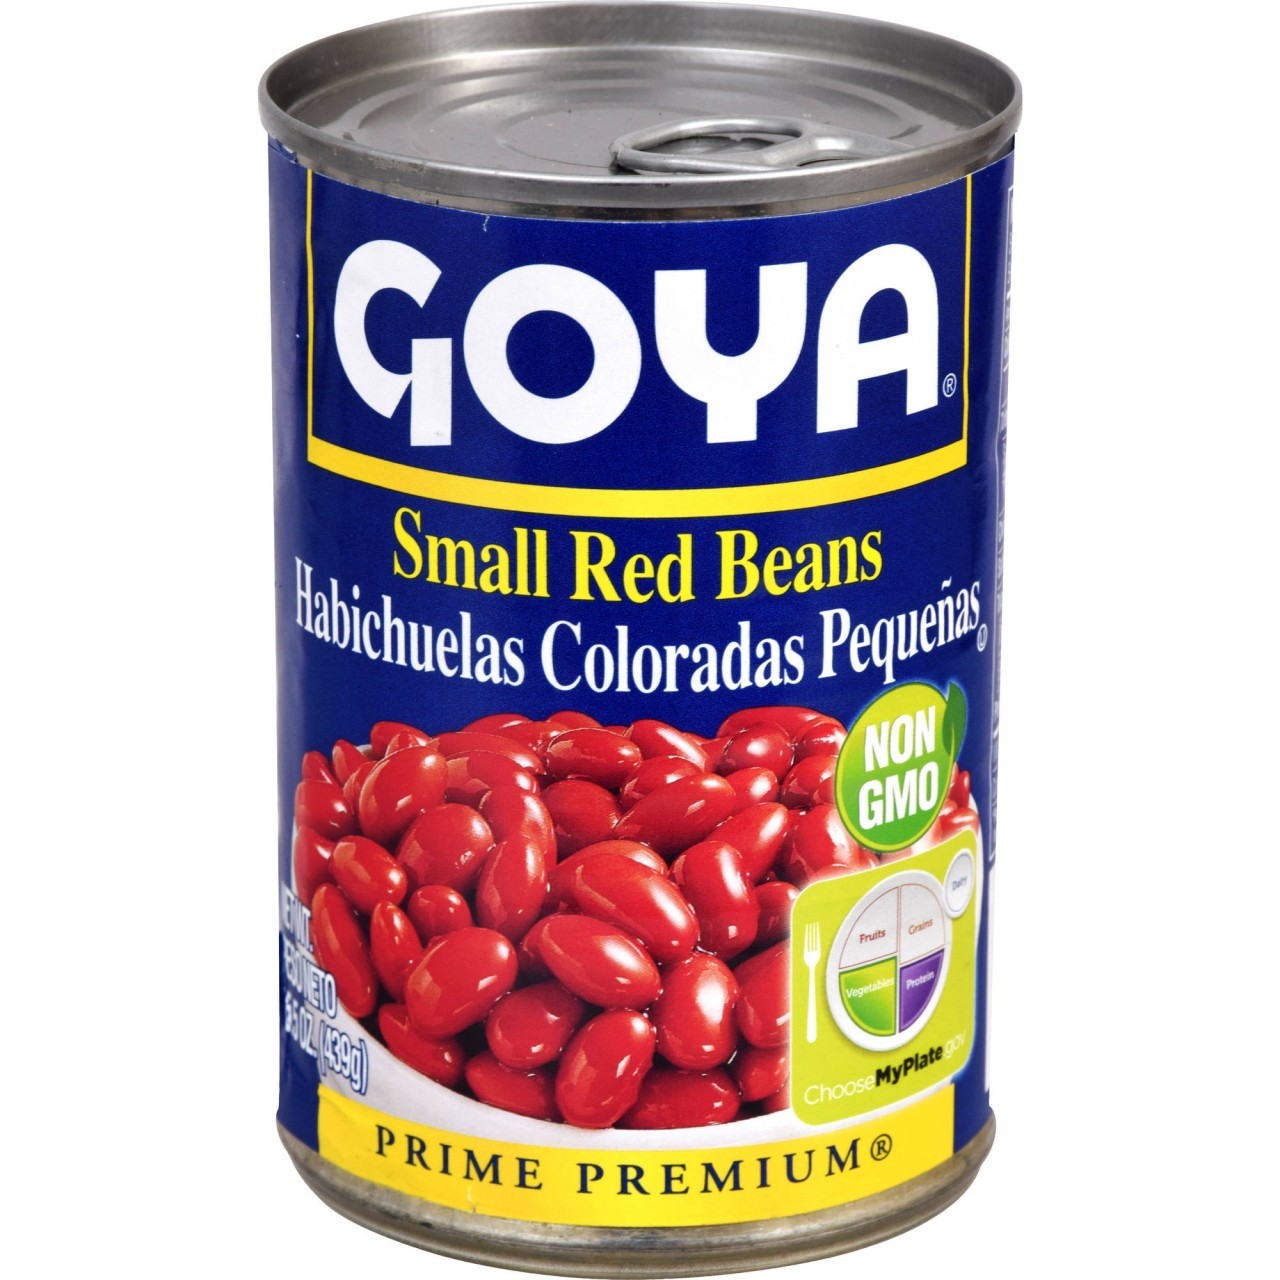 GOYA BEANS SMALL RED 15.5oz